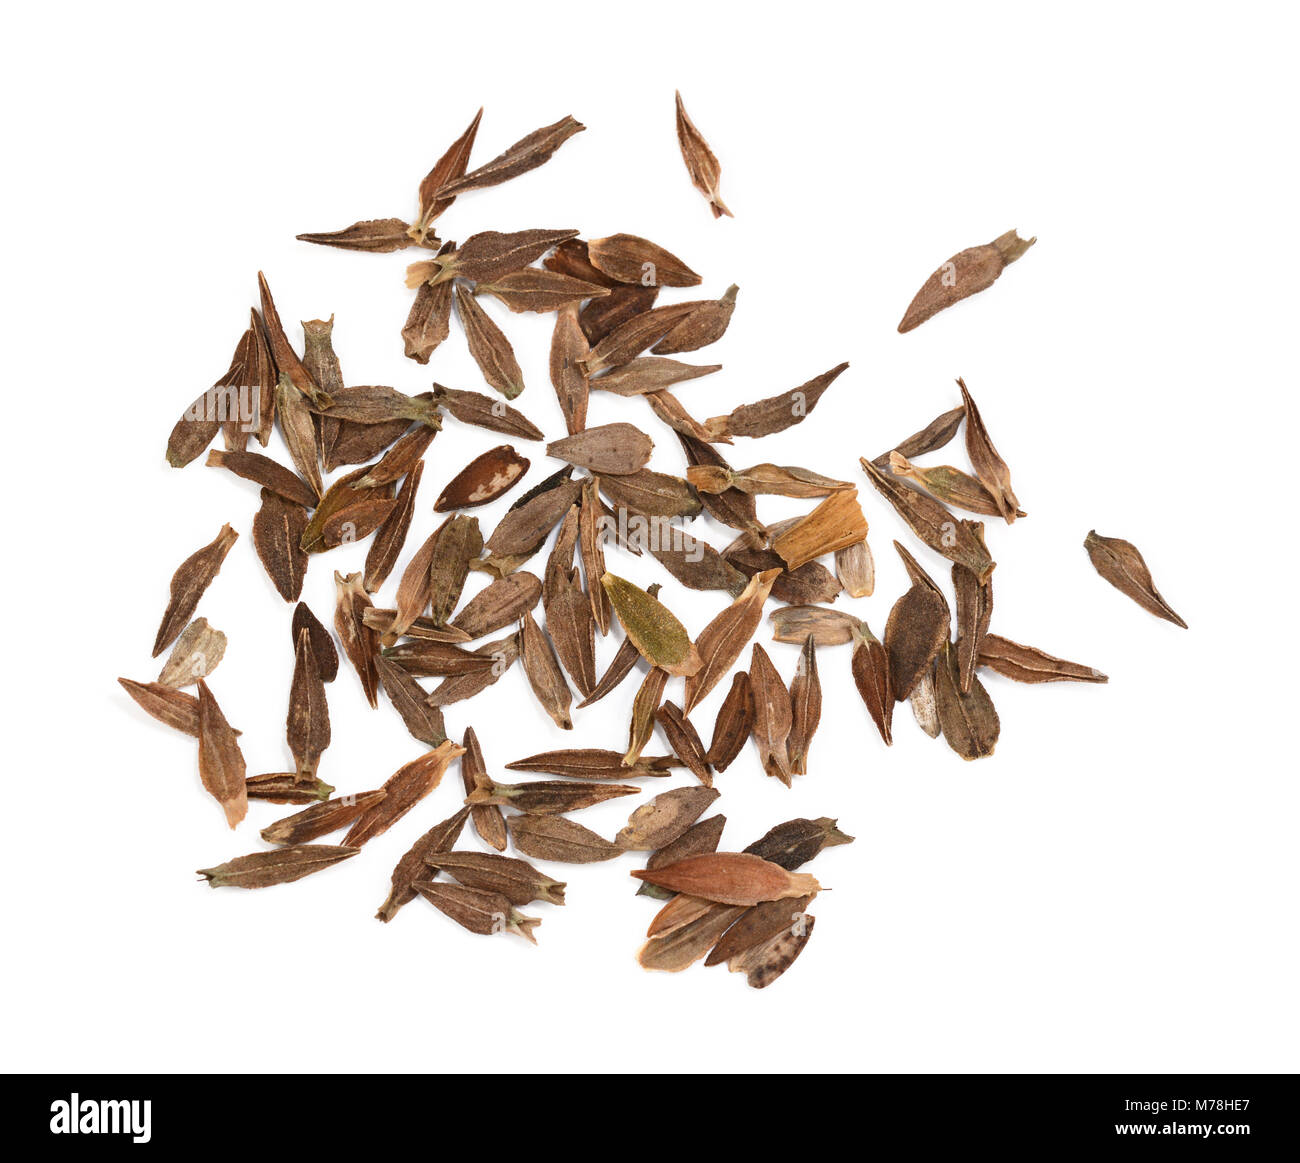 Spear-shaped, flat zinnia flower seeds scattered on a white background Stock Photo